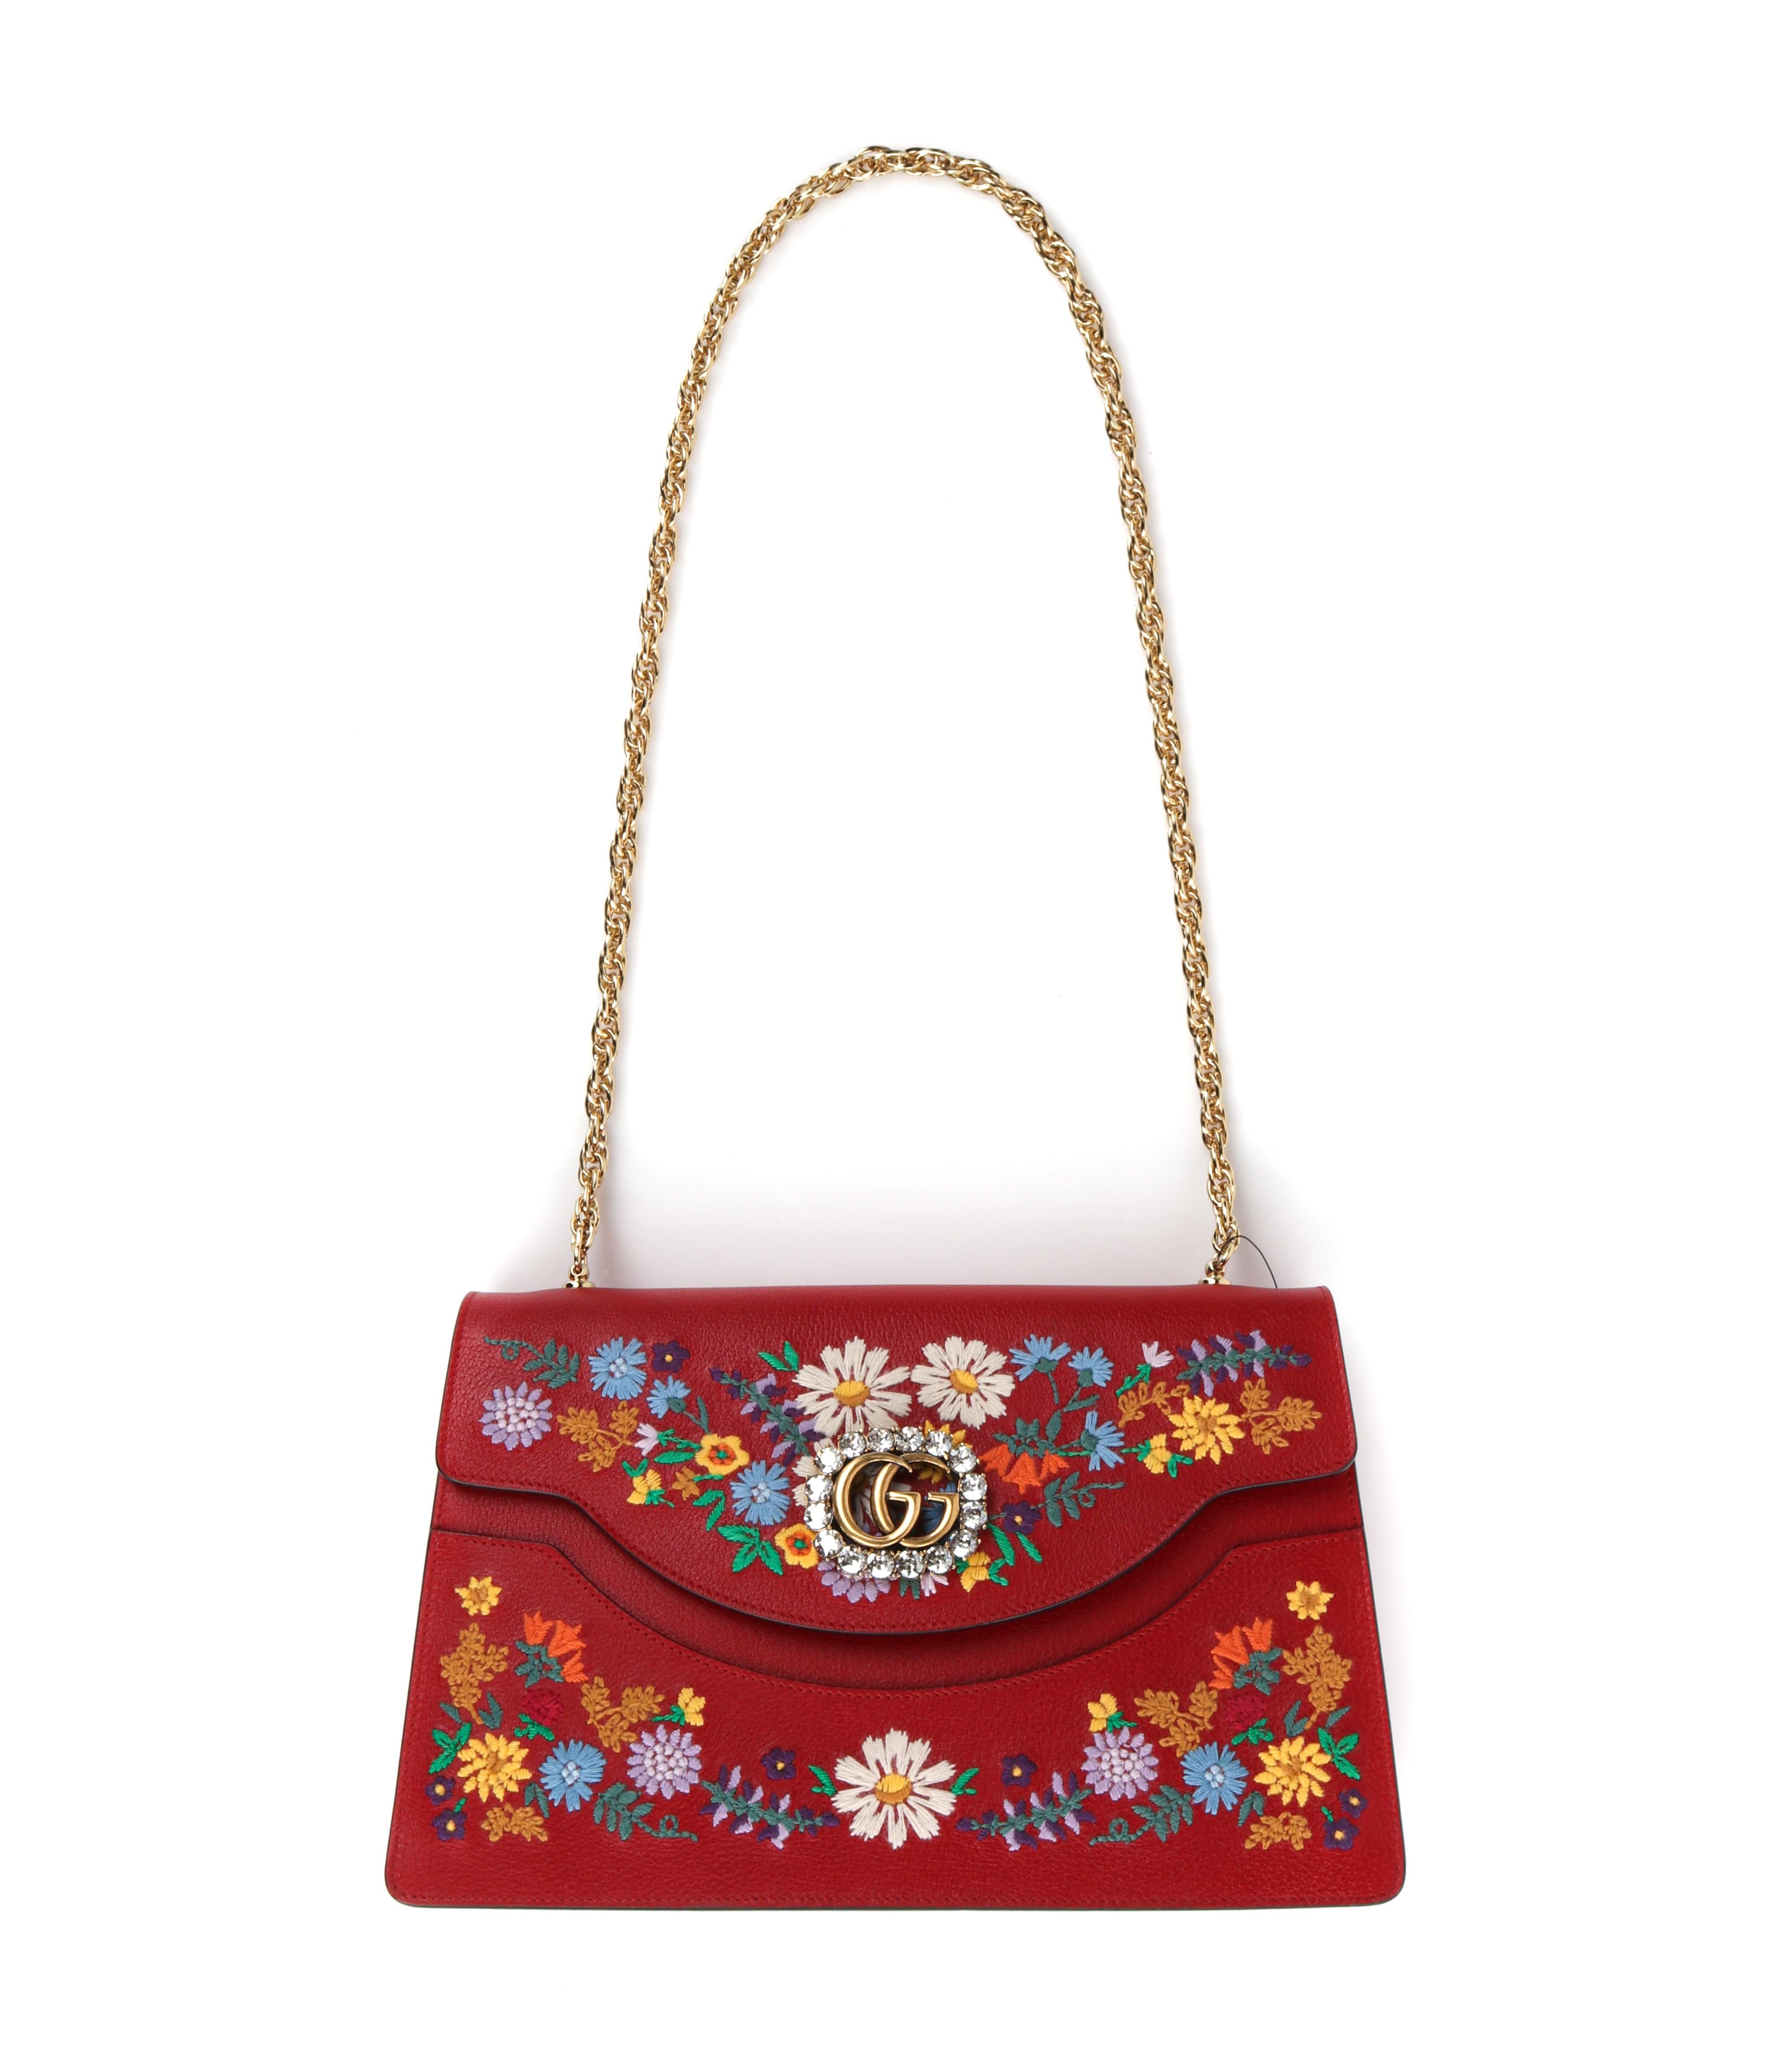 GUCCI Cruise 2018 “Linea Ricami” Red Floral Cat Crystal GG Large Shoulder Bag
 
Brand/Manufacturer: Gucci
Collection: Cruise 2018
Designer: Alessandro Michele
Manufacturer Style Name: “Linea Ricani” Shoulder bag
Style: Shoulder bag
Color(s): Red